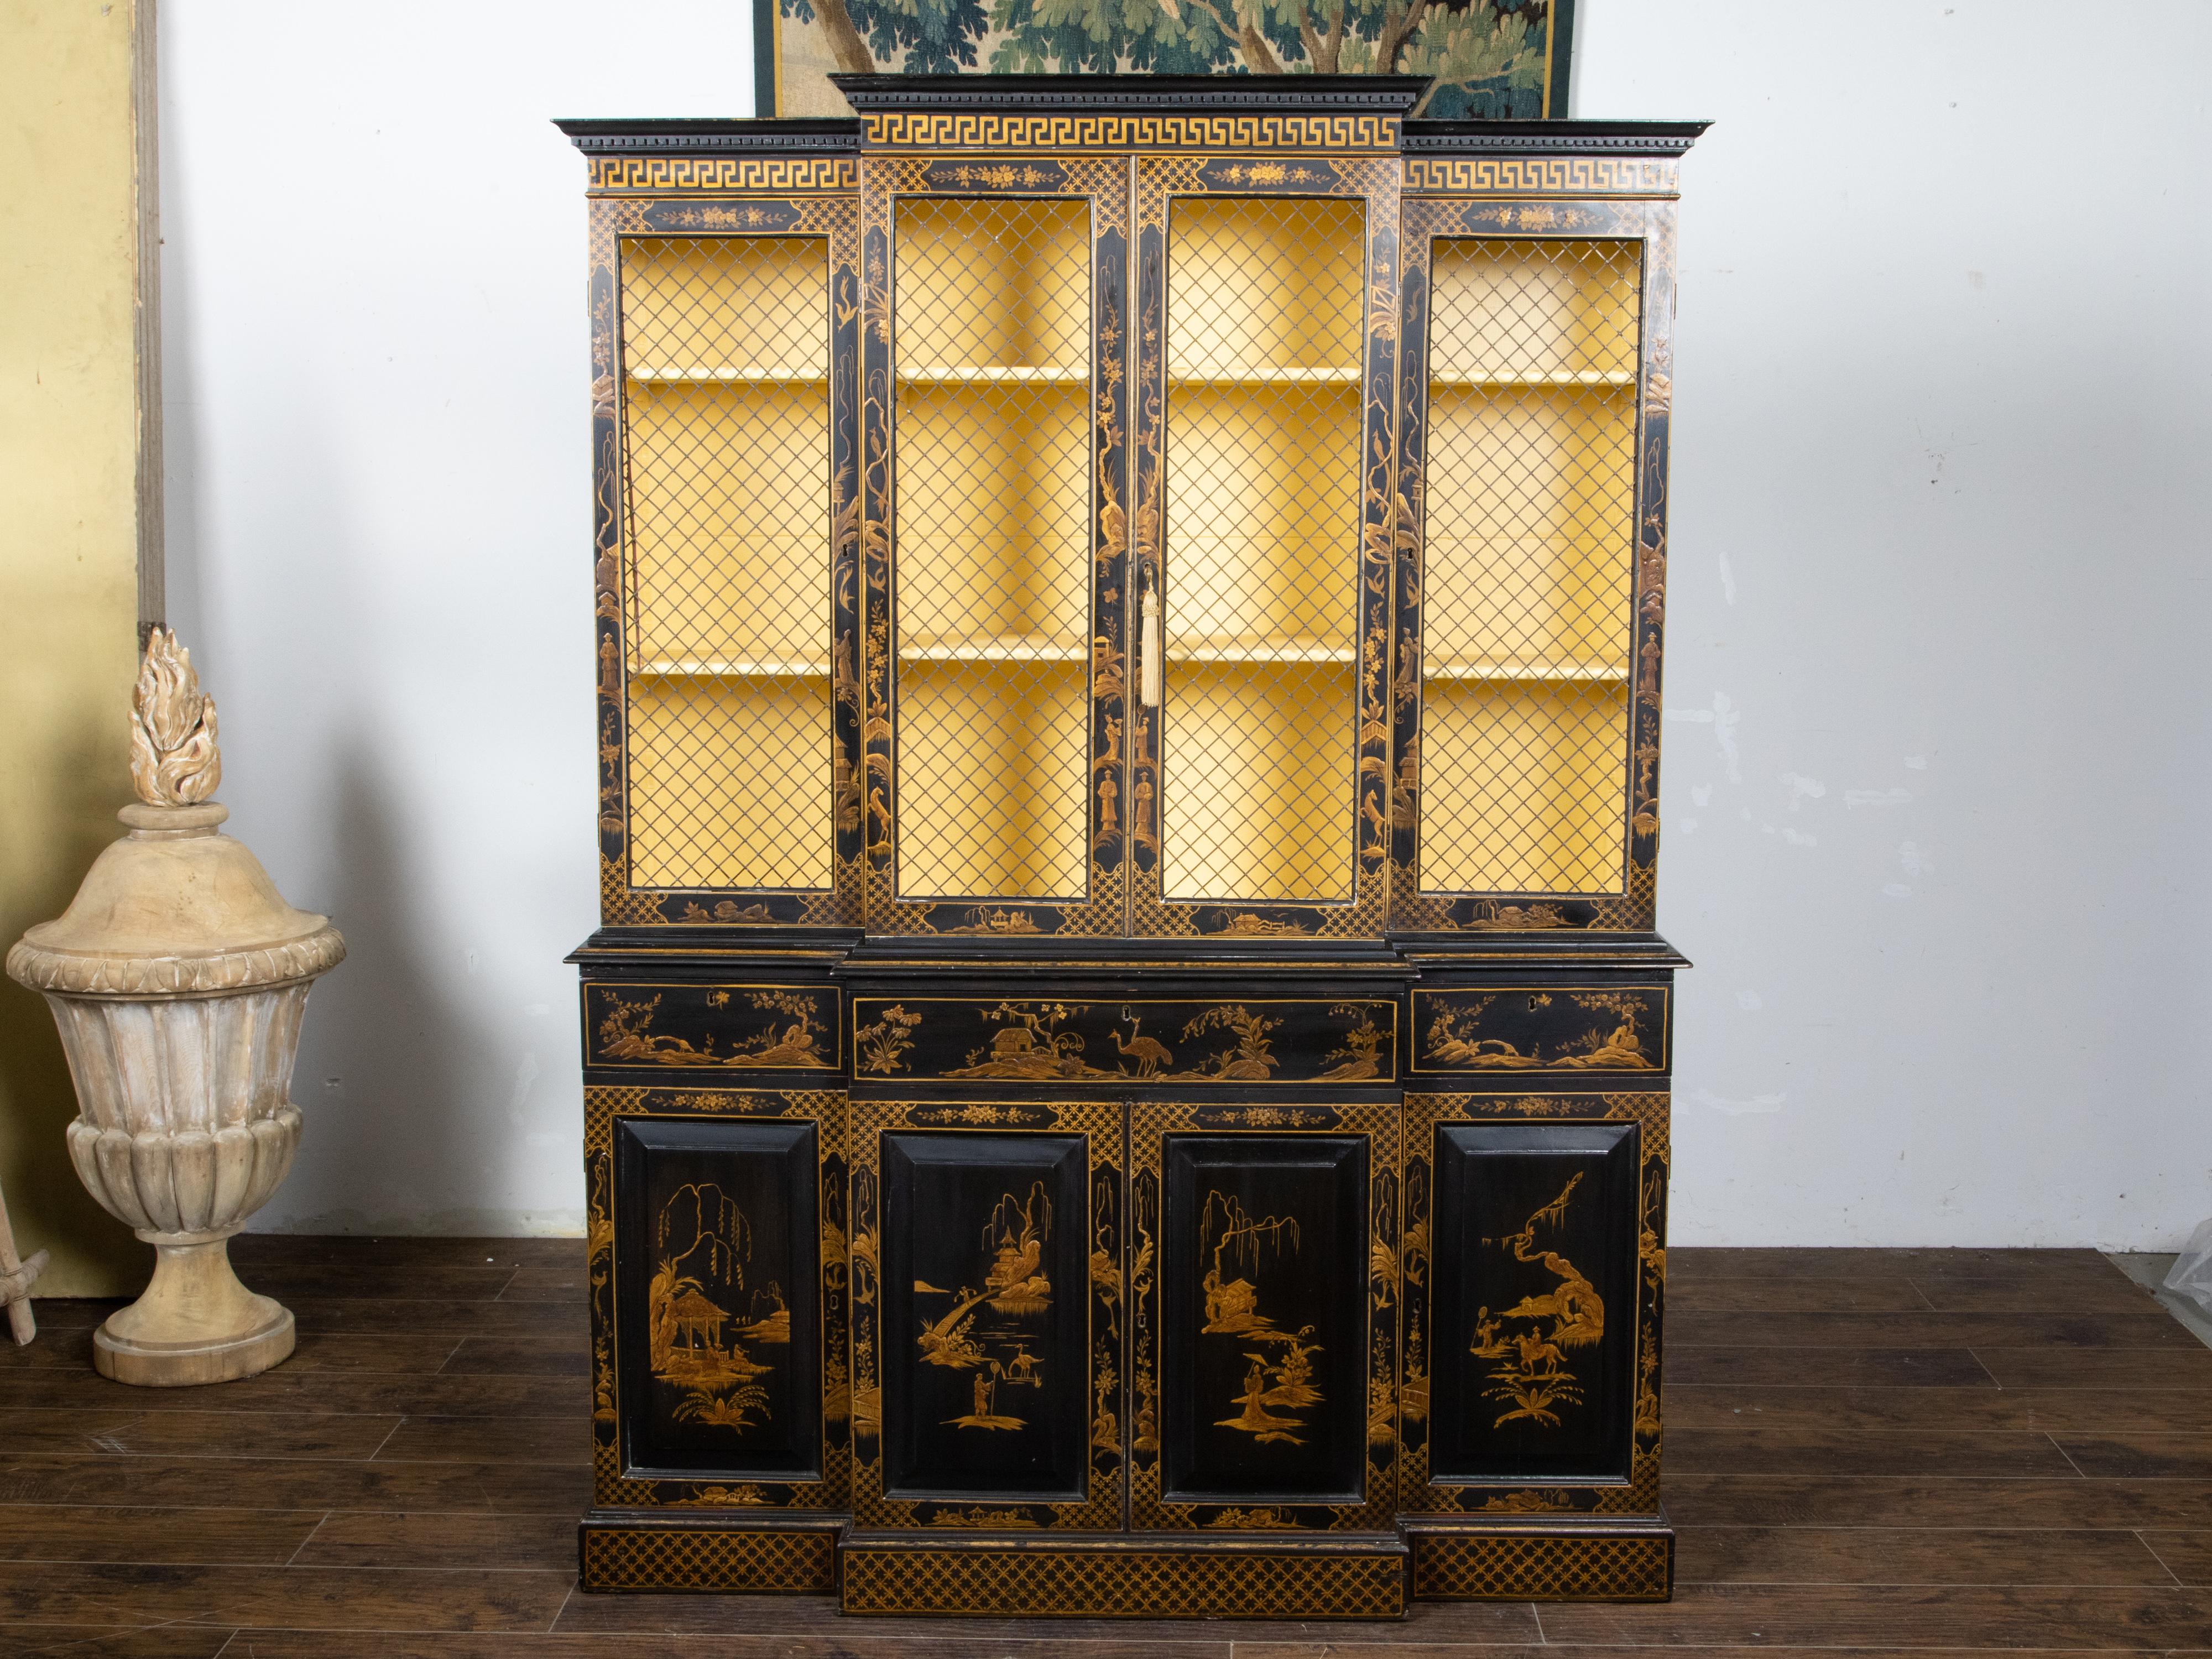 An English two part black and gold breakfront bookcase from the late 19th century with Chinoiserie décor, gilded Greek Key and floral décor, chicken wire doors, drawers and additional wooden doors. Created in England during the last quarter of the